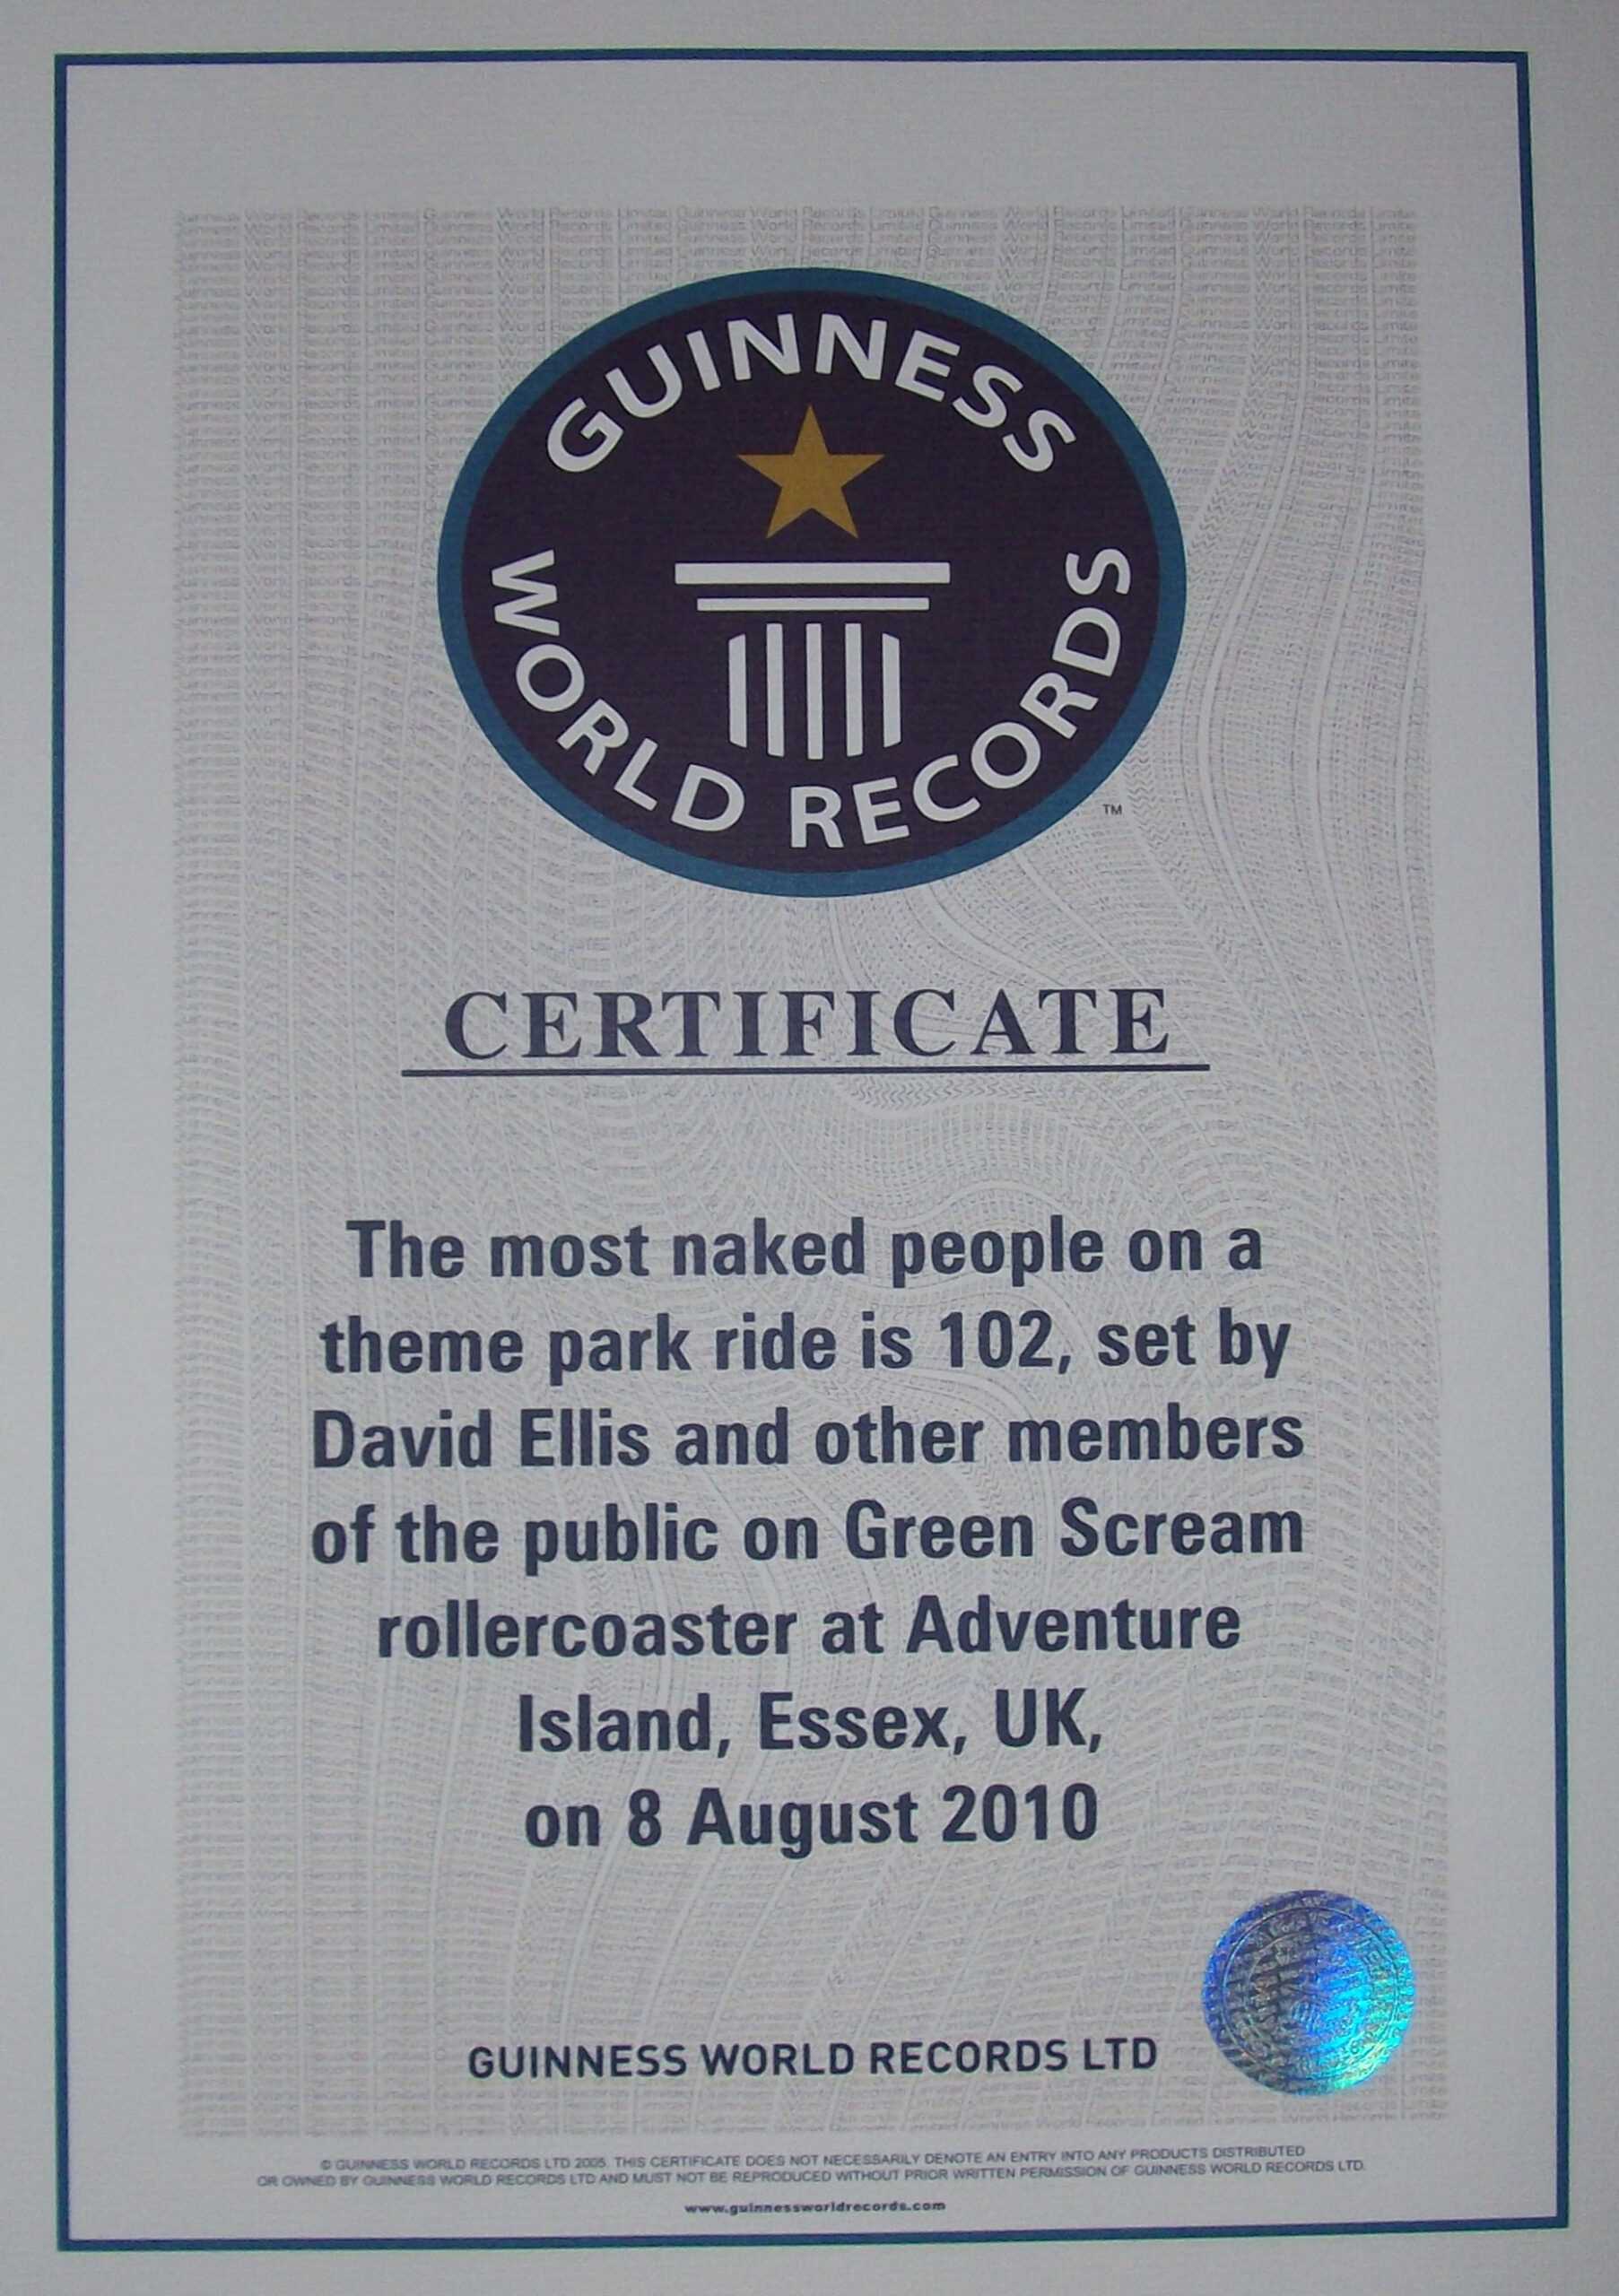 Guinness World Record Certificate Template – Dalep Throughout Guinness World Record Certificate Template